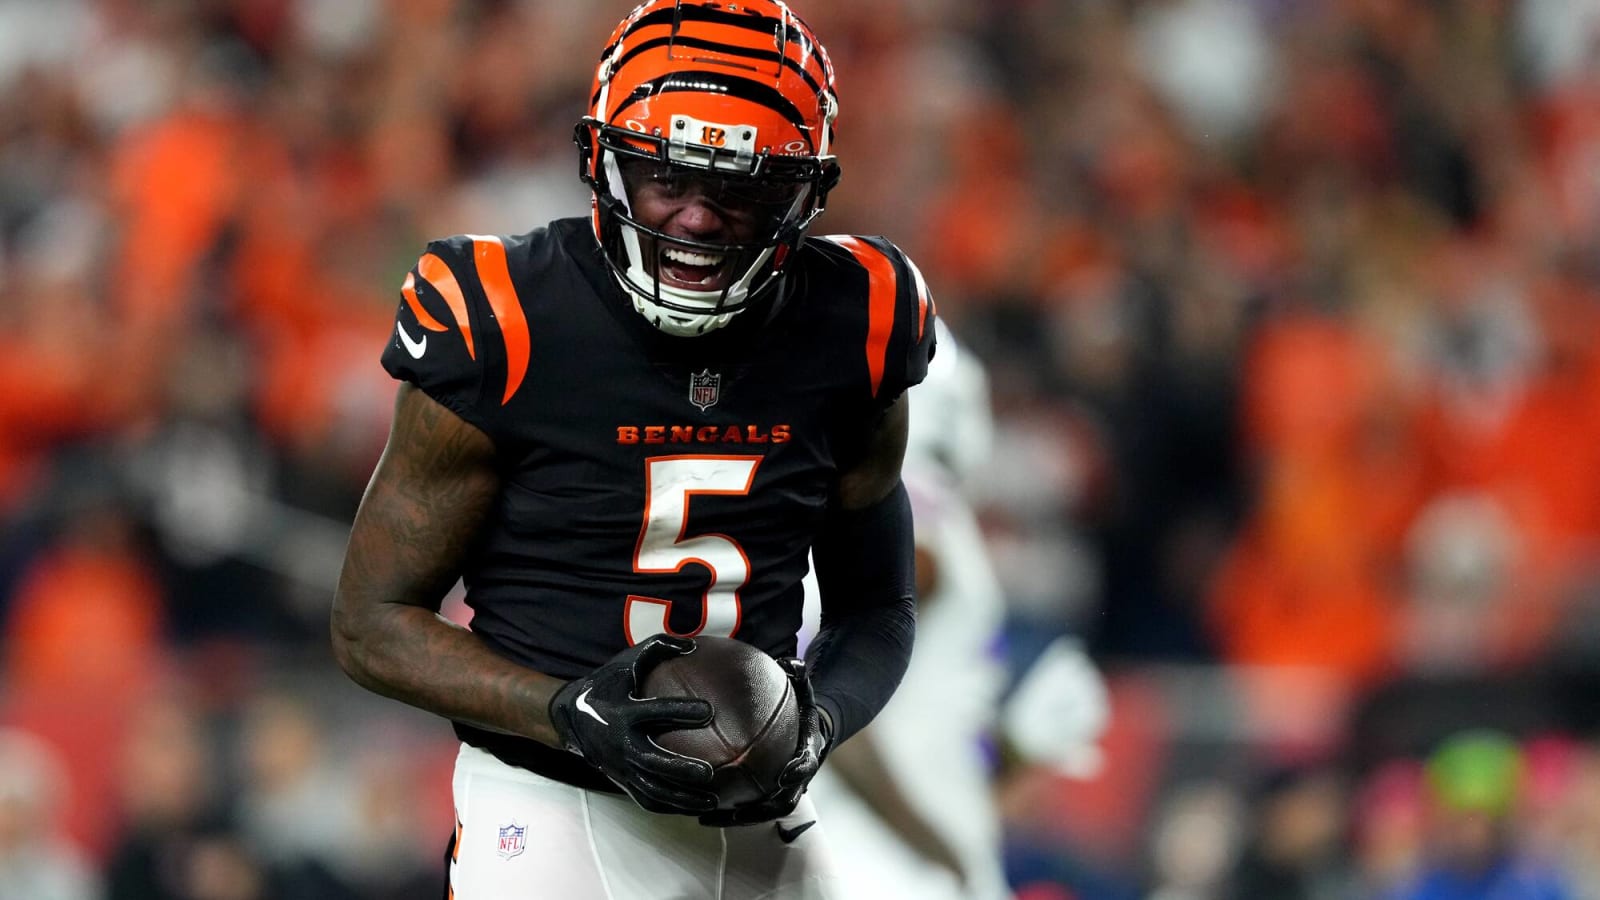 Cincinnati Bengals reportedly gave Tee Higgins a low-ball offer proposing to pay him under $20 million per year